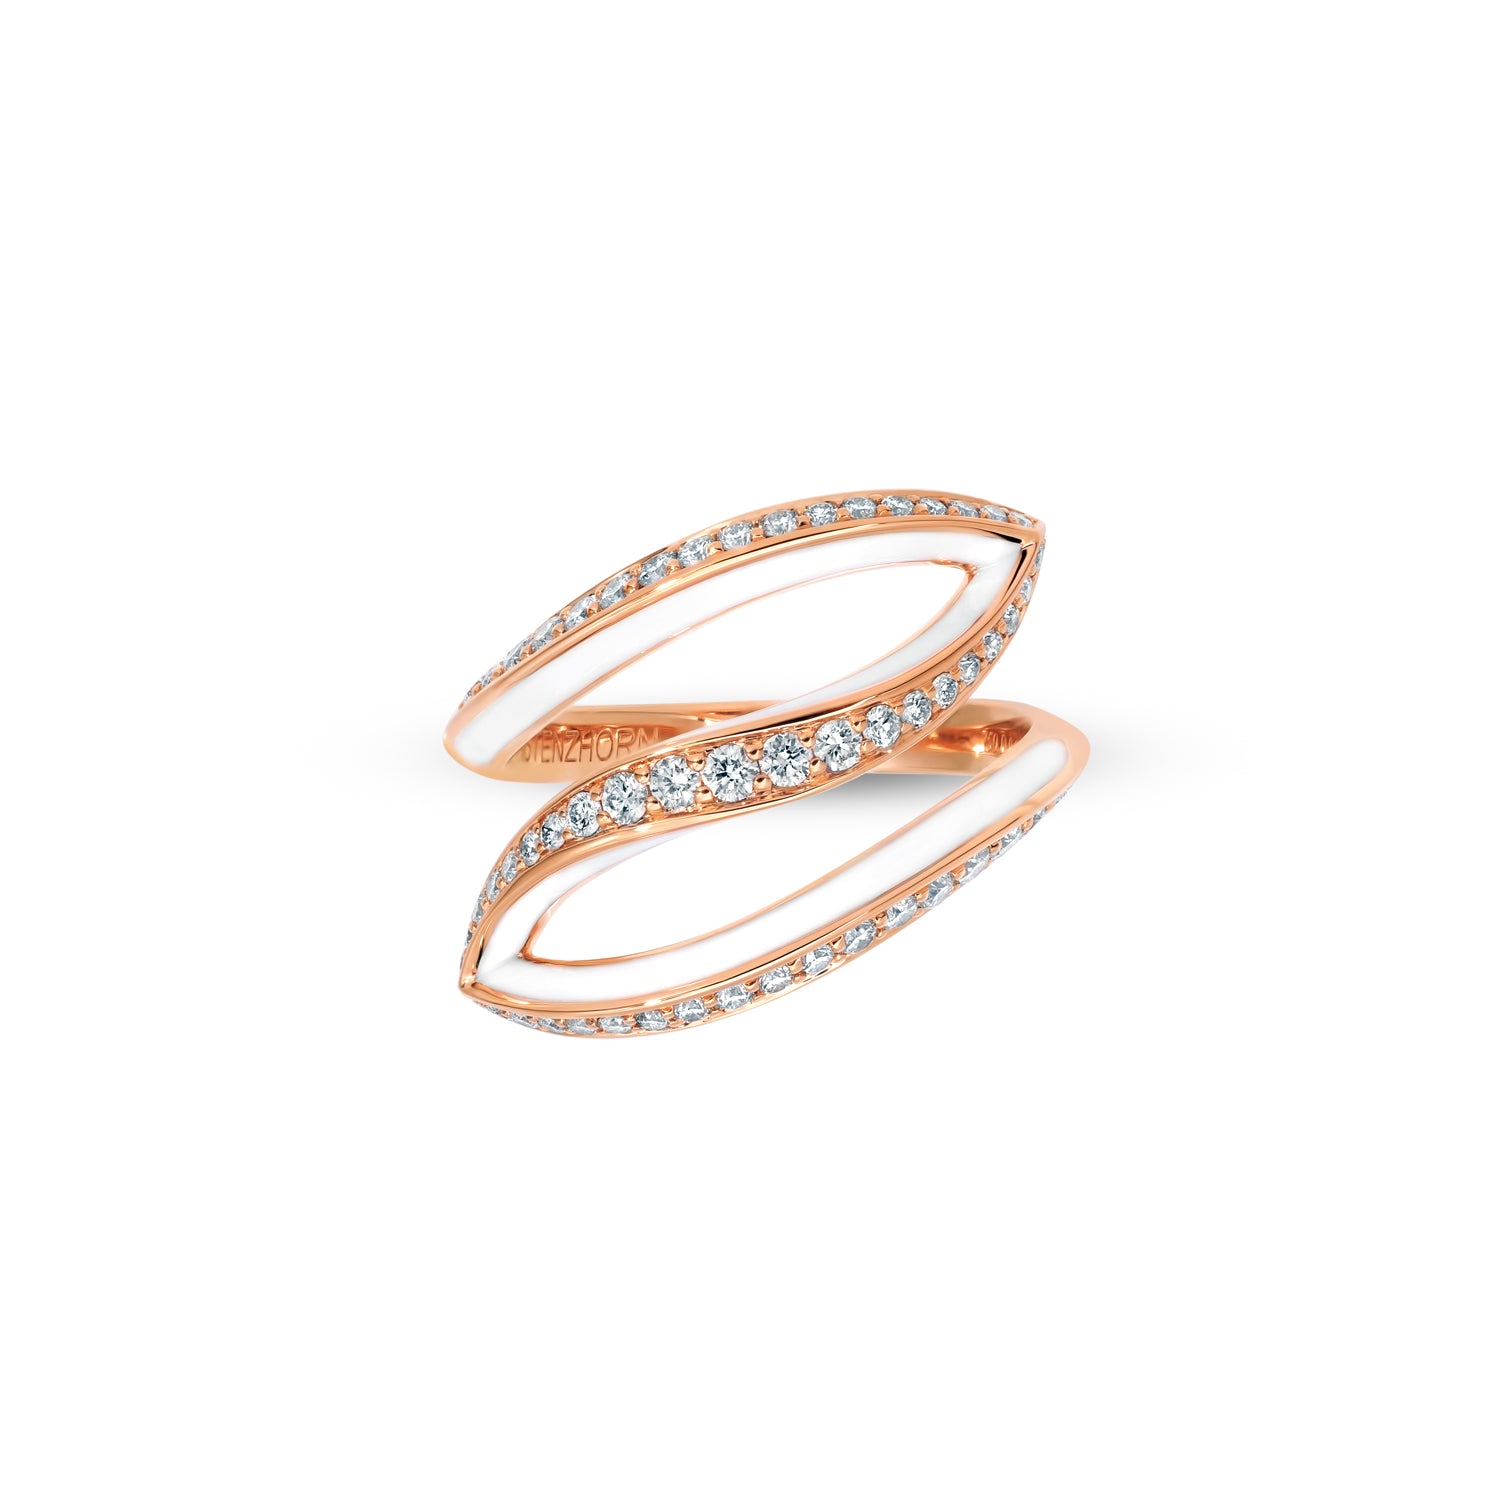 VIVA small Curved Ring with Diamond and White Enamel